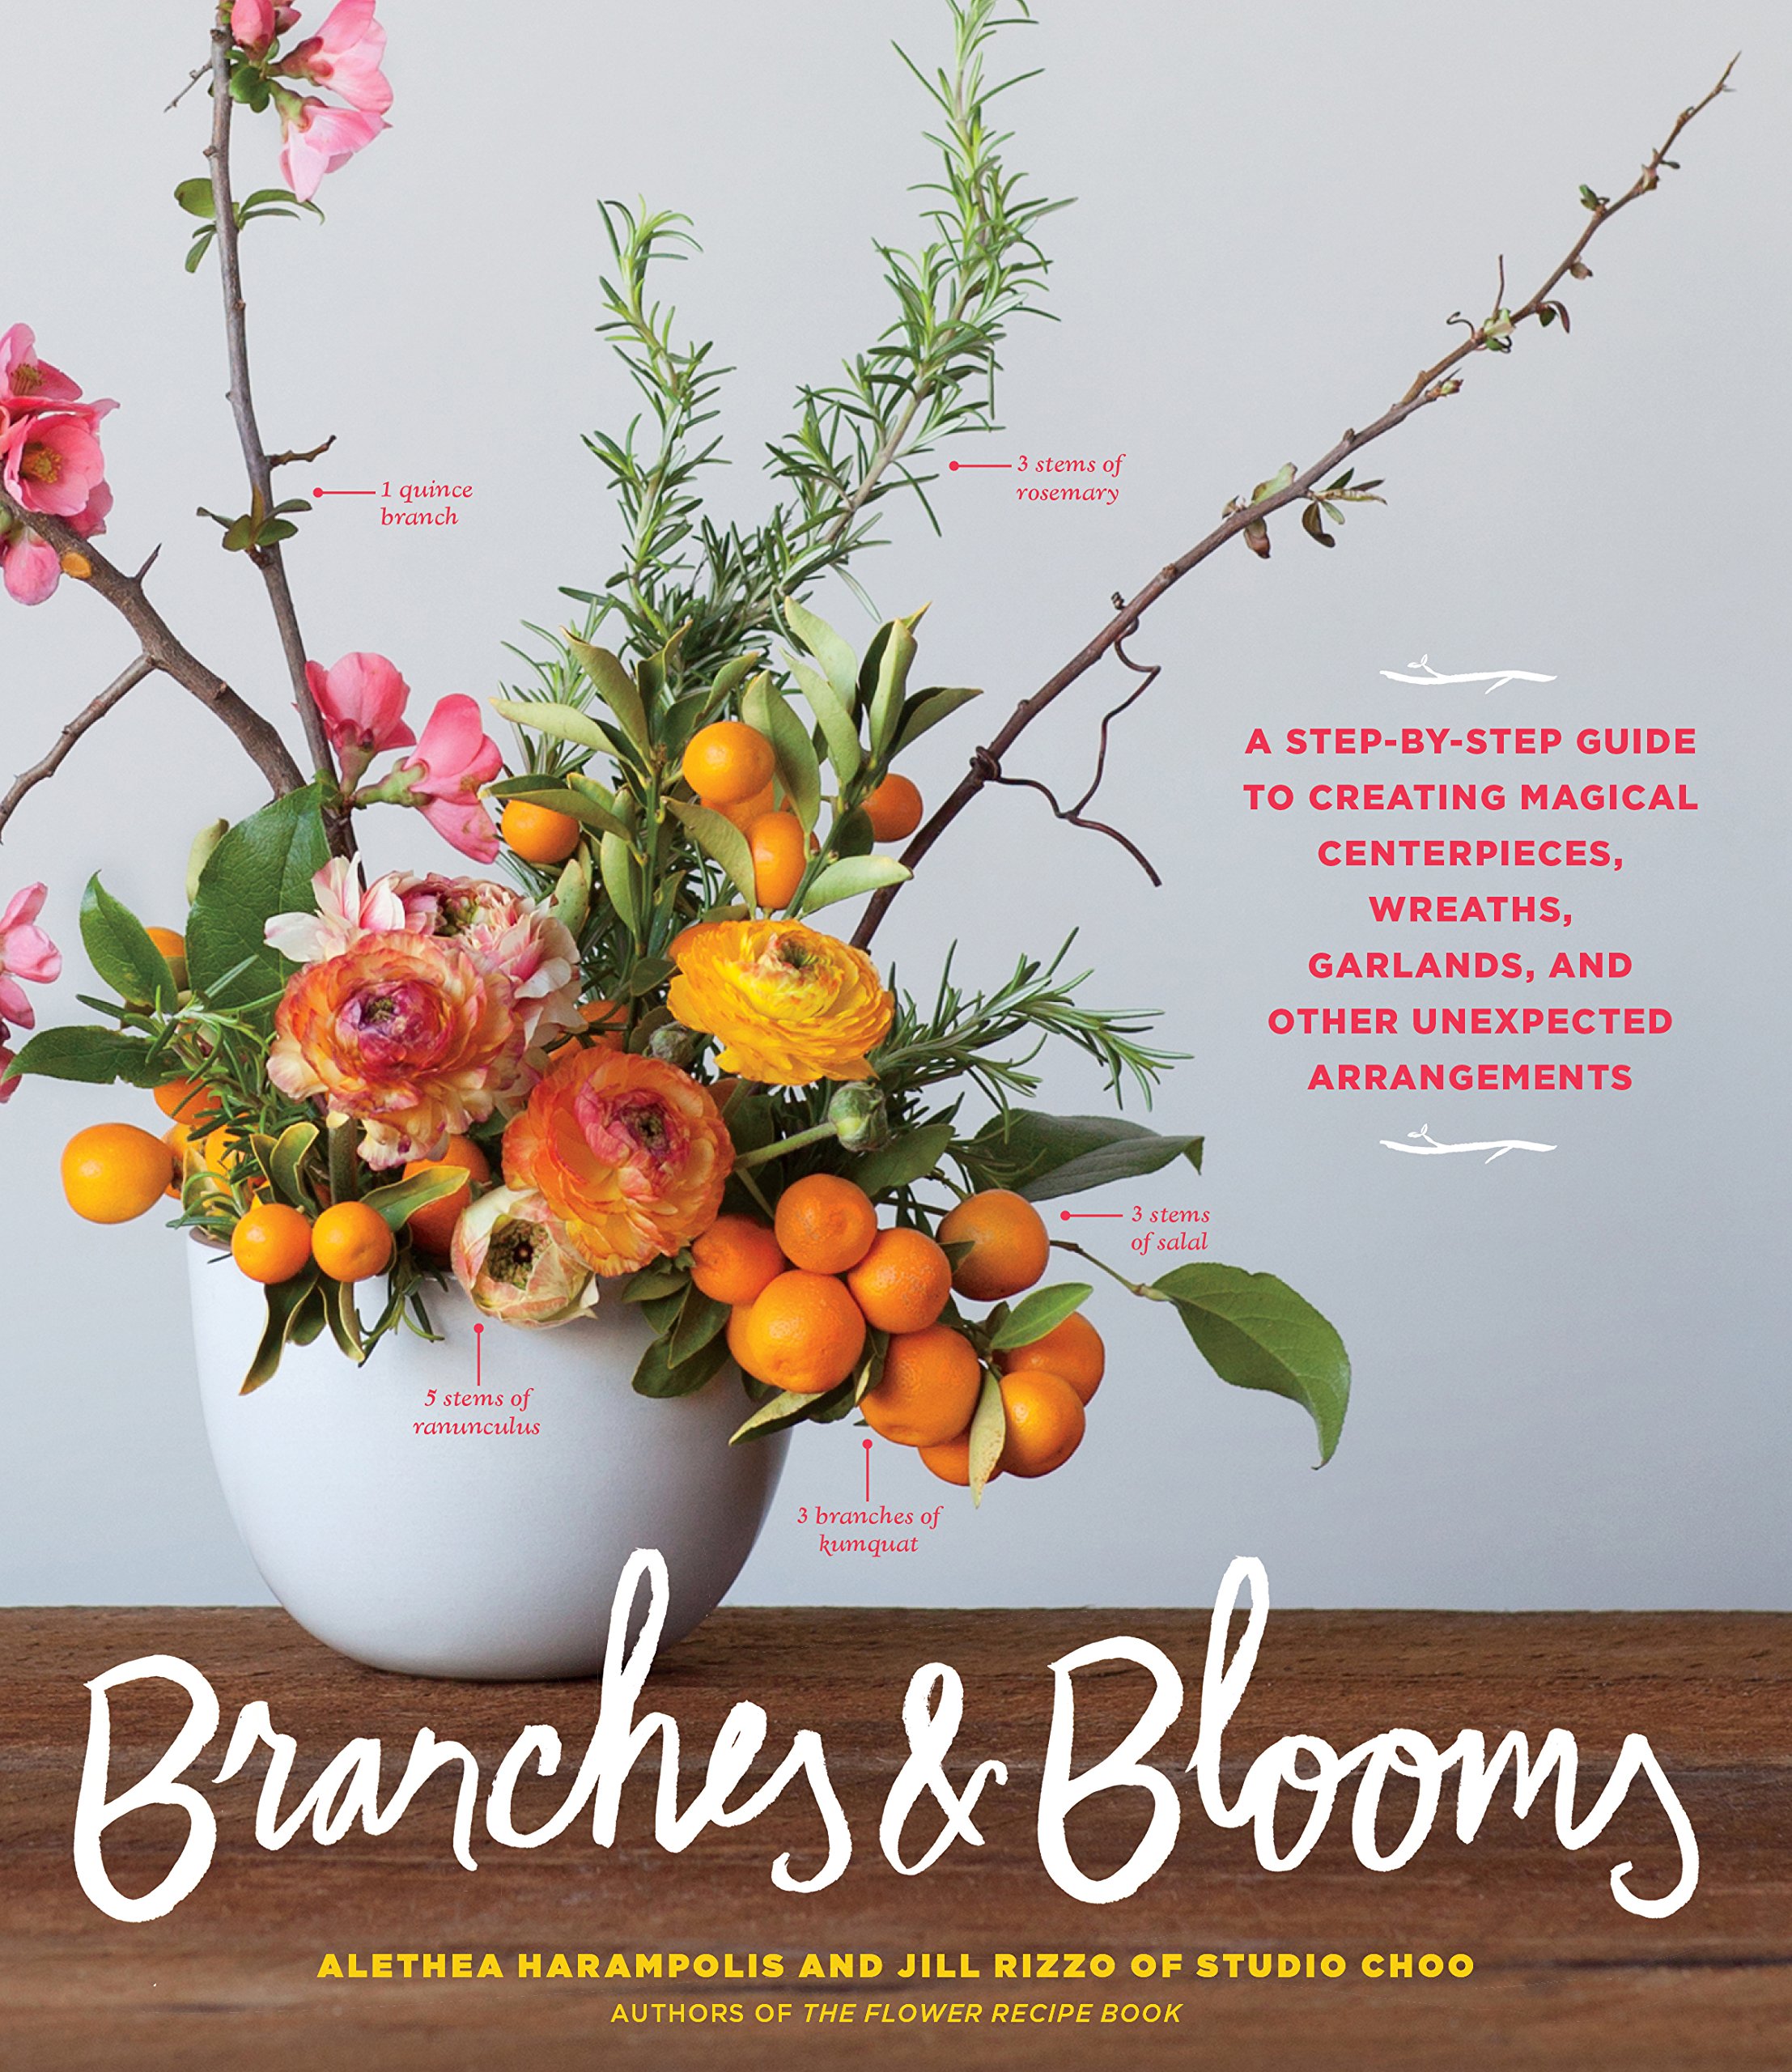 Branches & Blooms: A Step-by-Step Guide to Creating Magical Centerpieces, Wreaths, Garlands, and Other Unexpected Arrangements by Alethea Harampolis